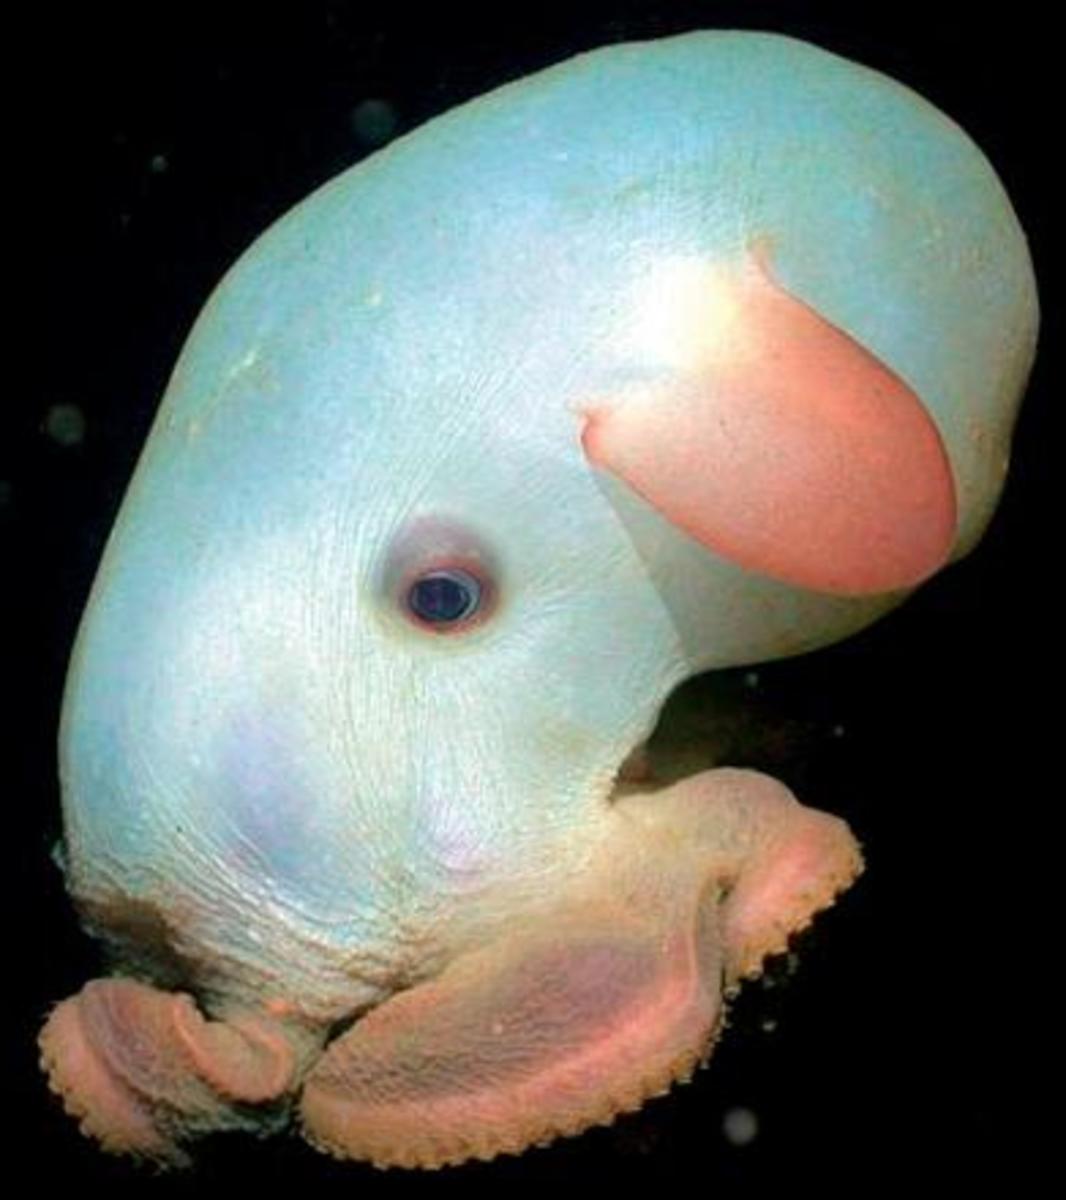 Grimpoteuthis, a type of Dumbo octopus (up to 5 feet), lives in every ocean, near the bottom